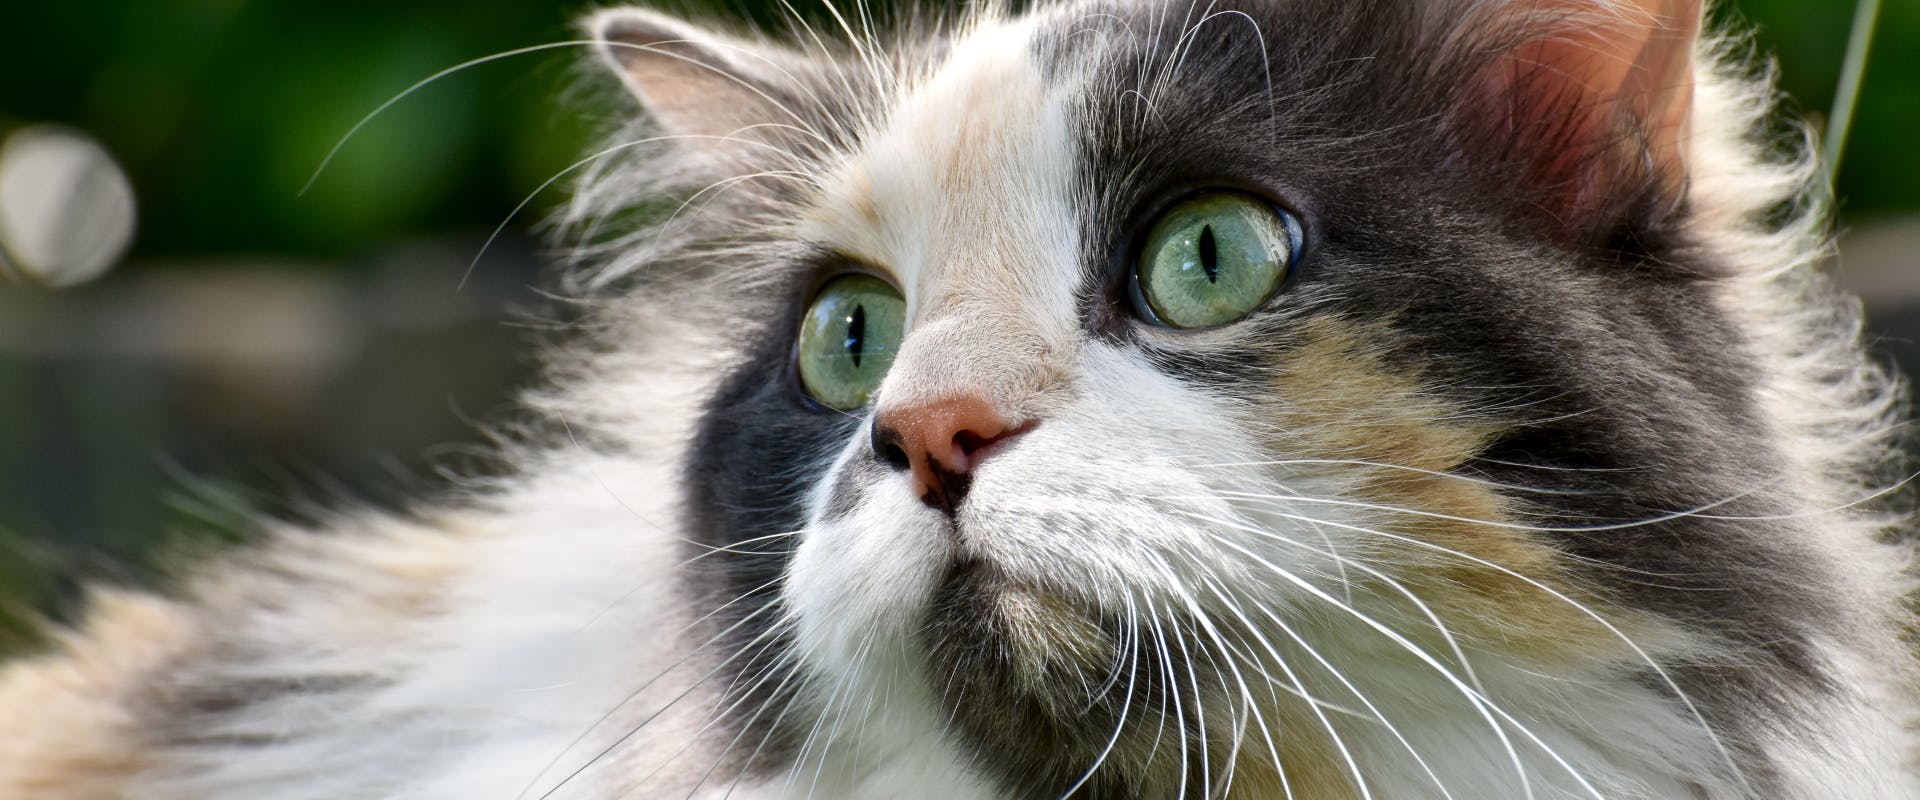 The calico cat: everything you need to know